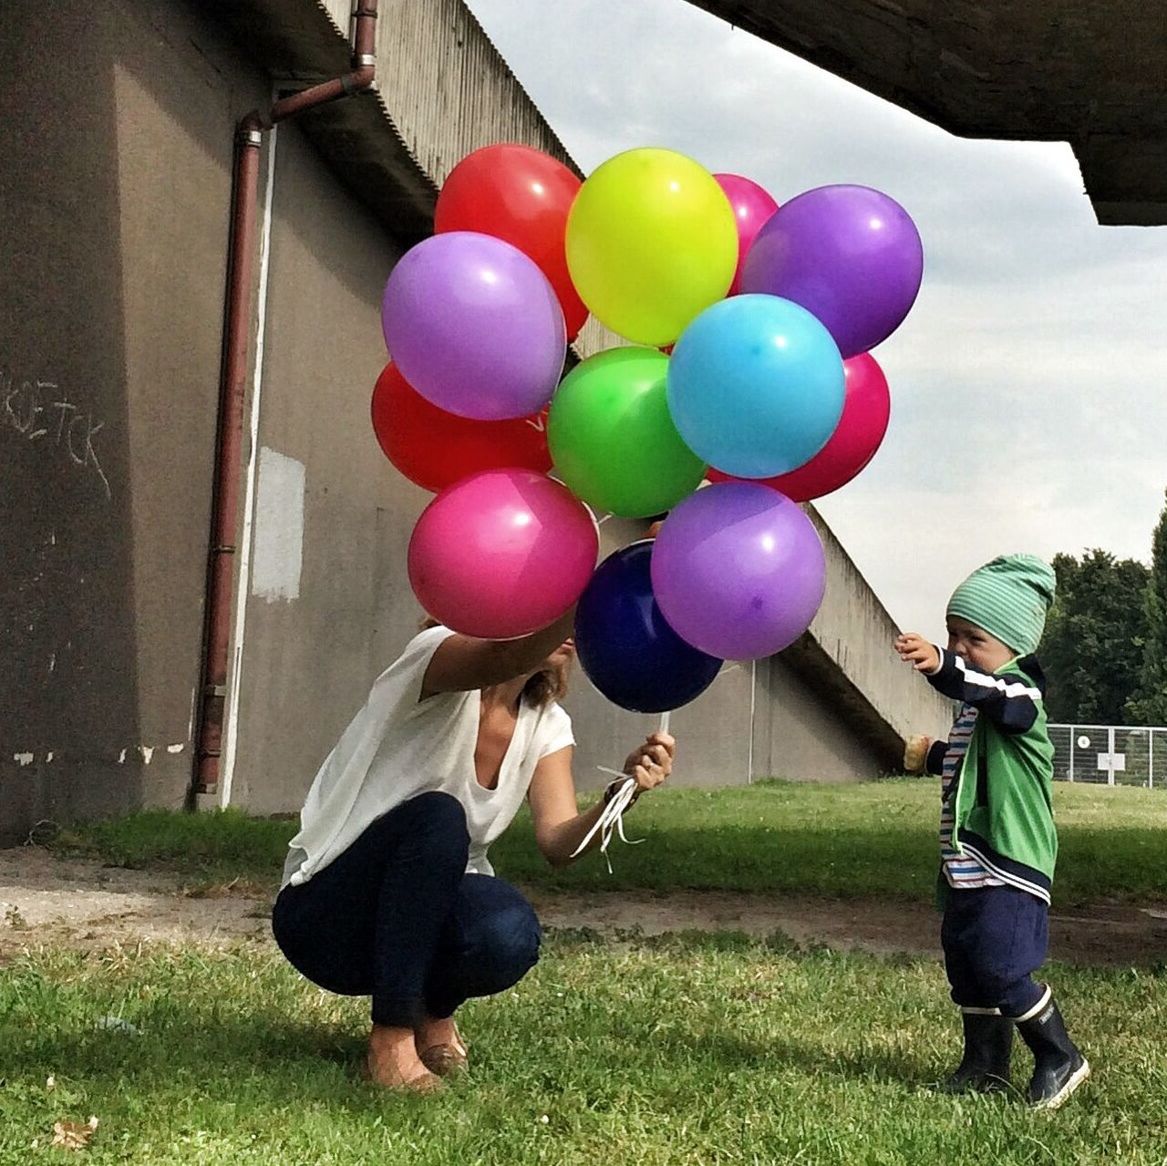 Mother and son with multi colored balloons at grassy field against sky